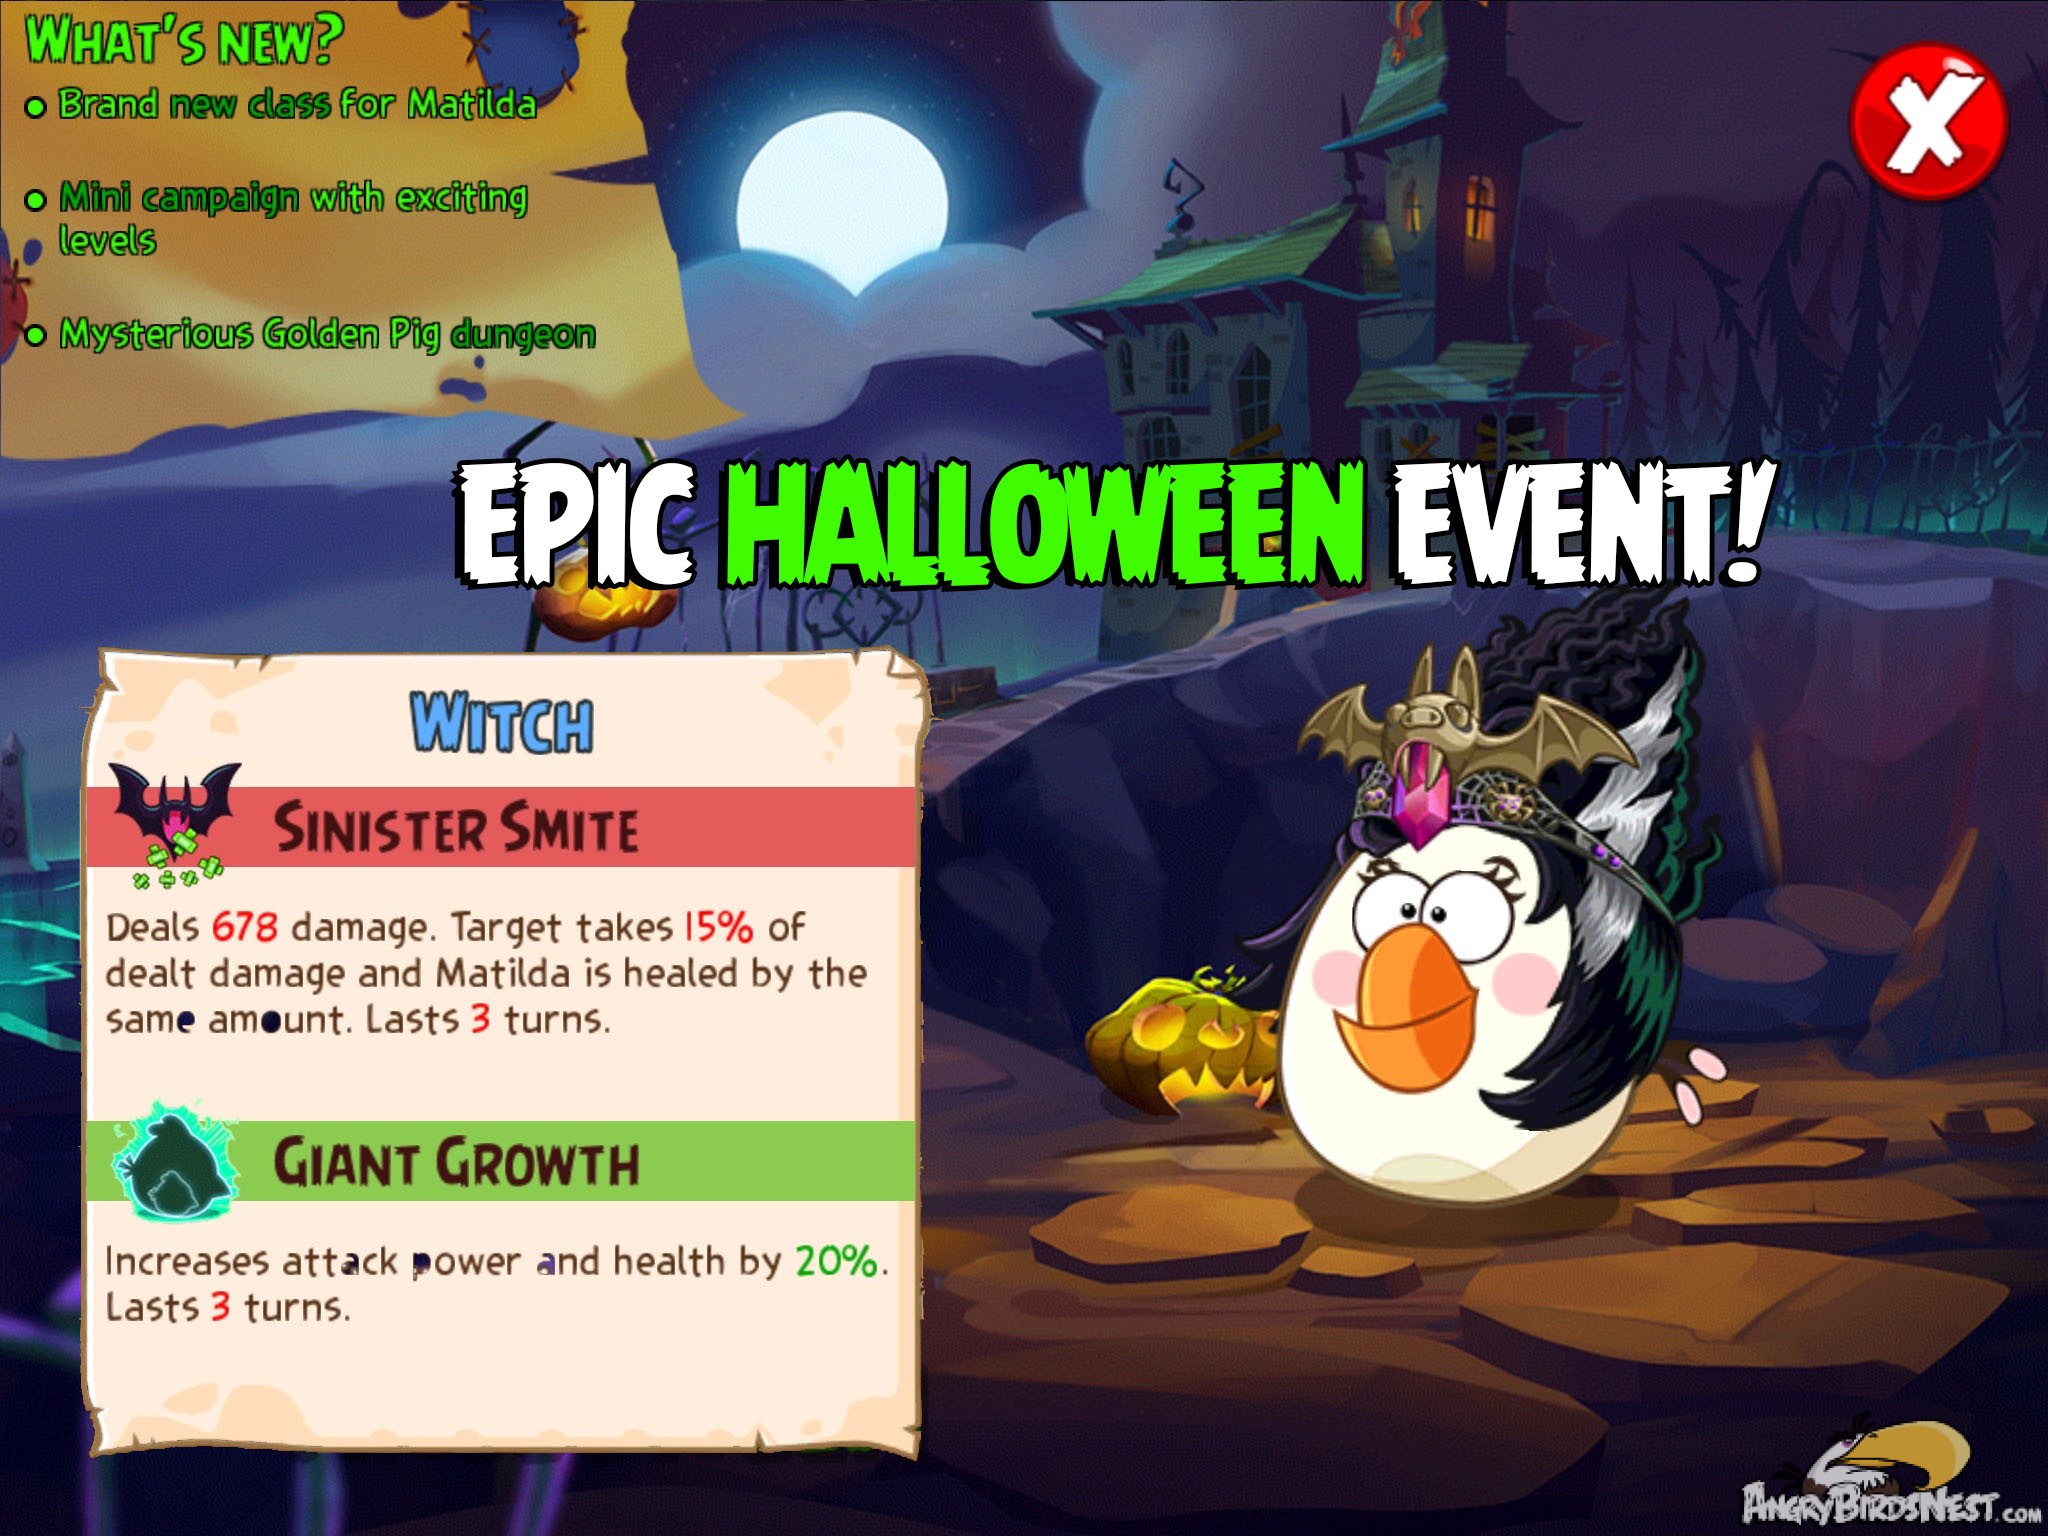 How To Install Angry Birds Epic In 2023 With EVENTS, ARENA, AND